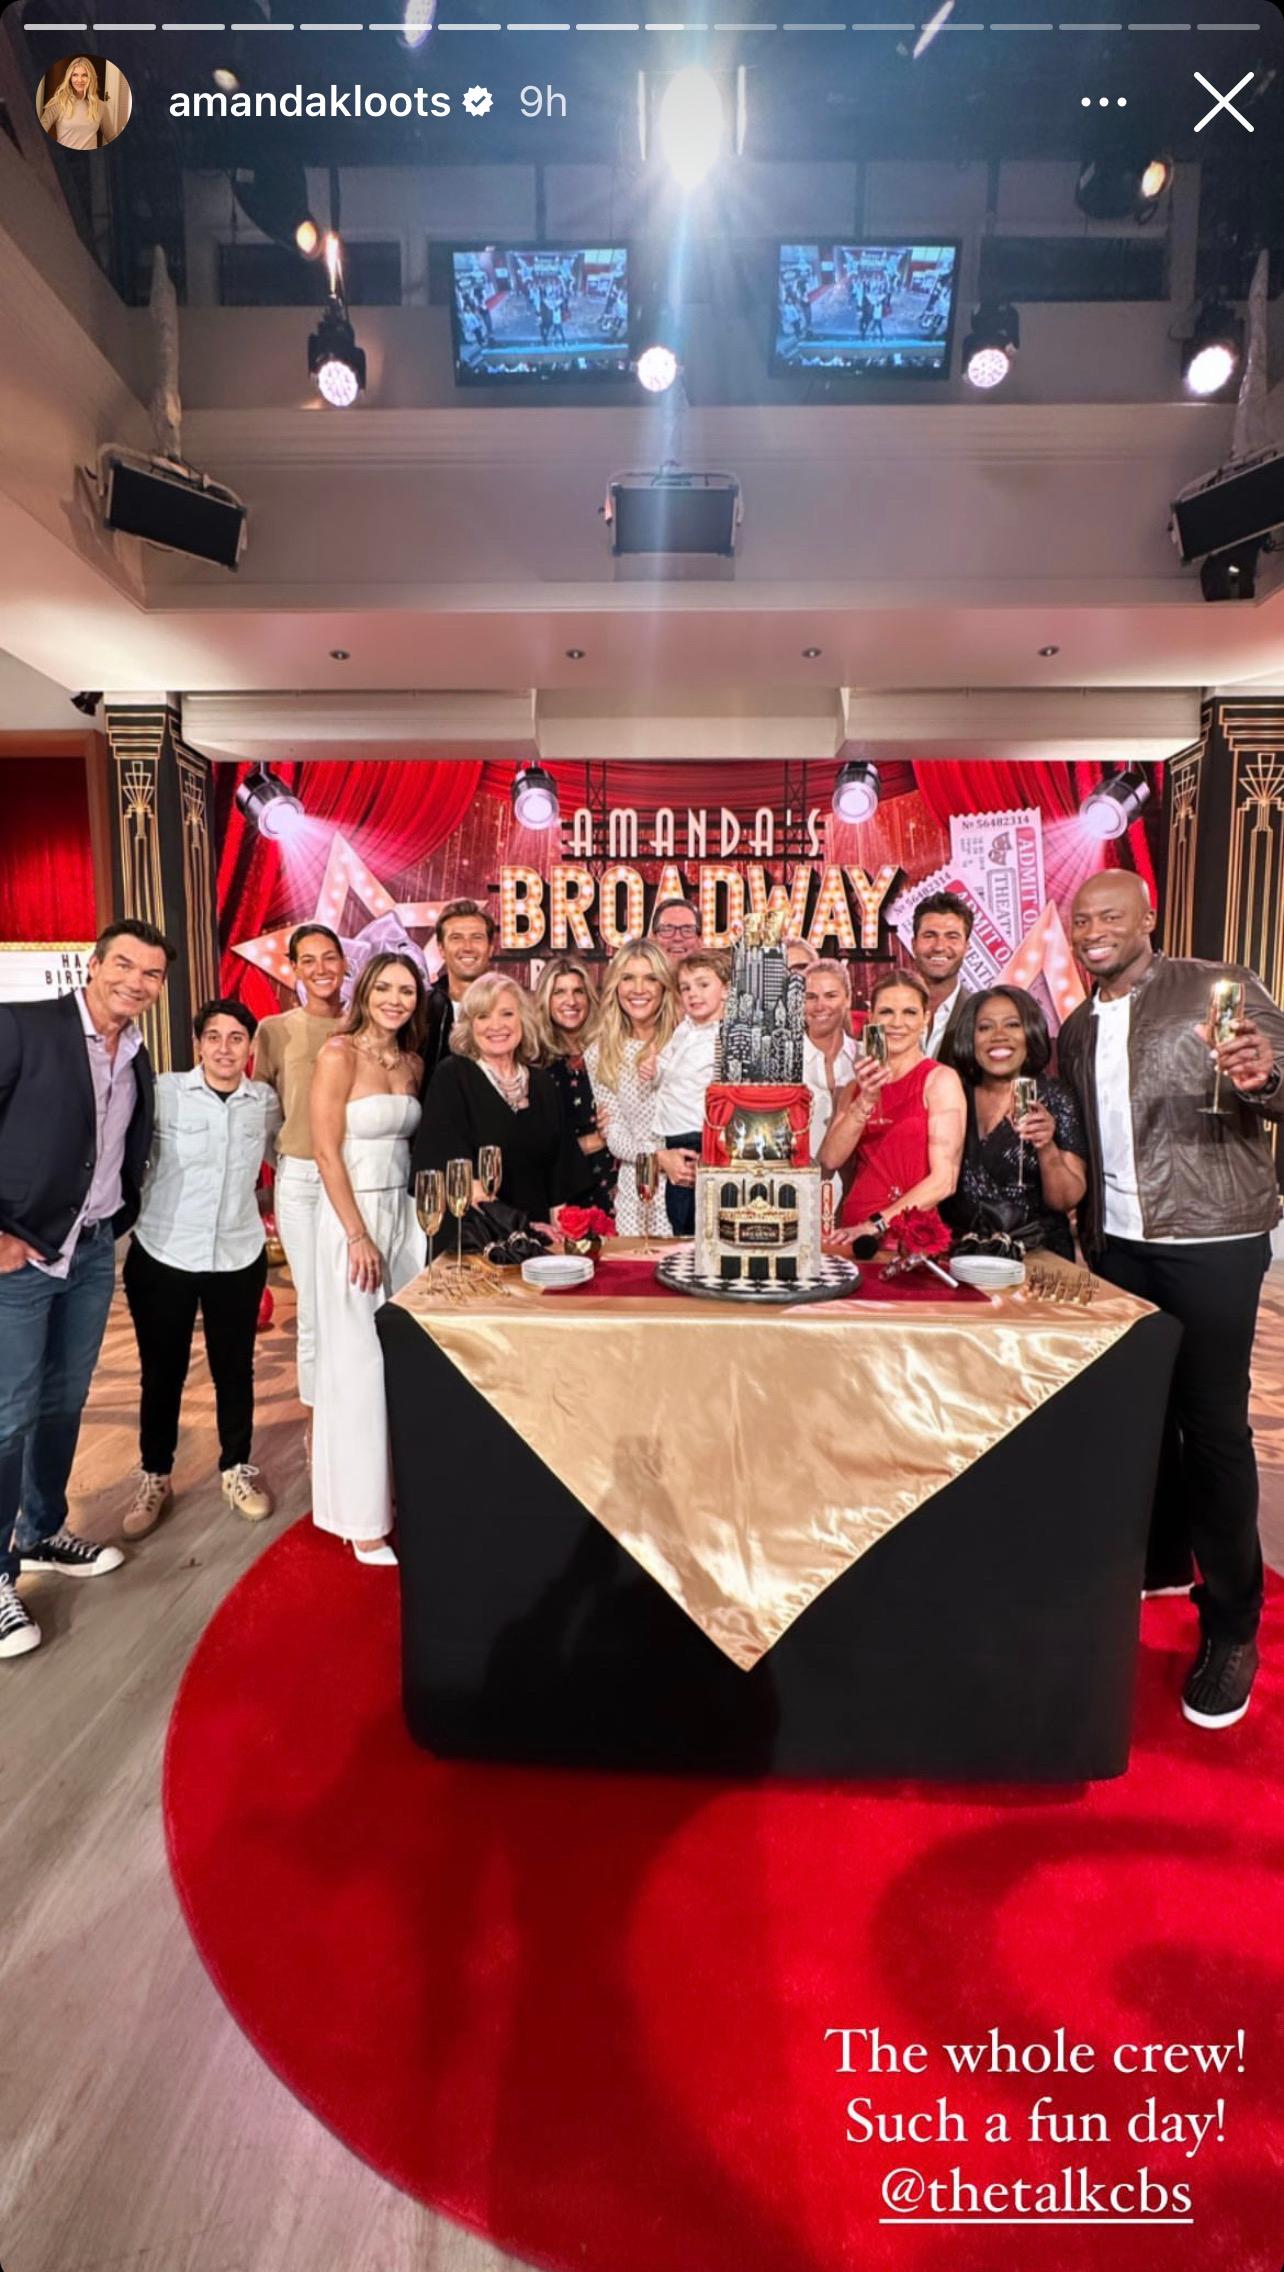 Amanda Kloots Treated To Broadway-Themed Birthday Party By 'The Talk' Colleagues